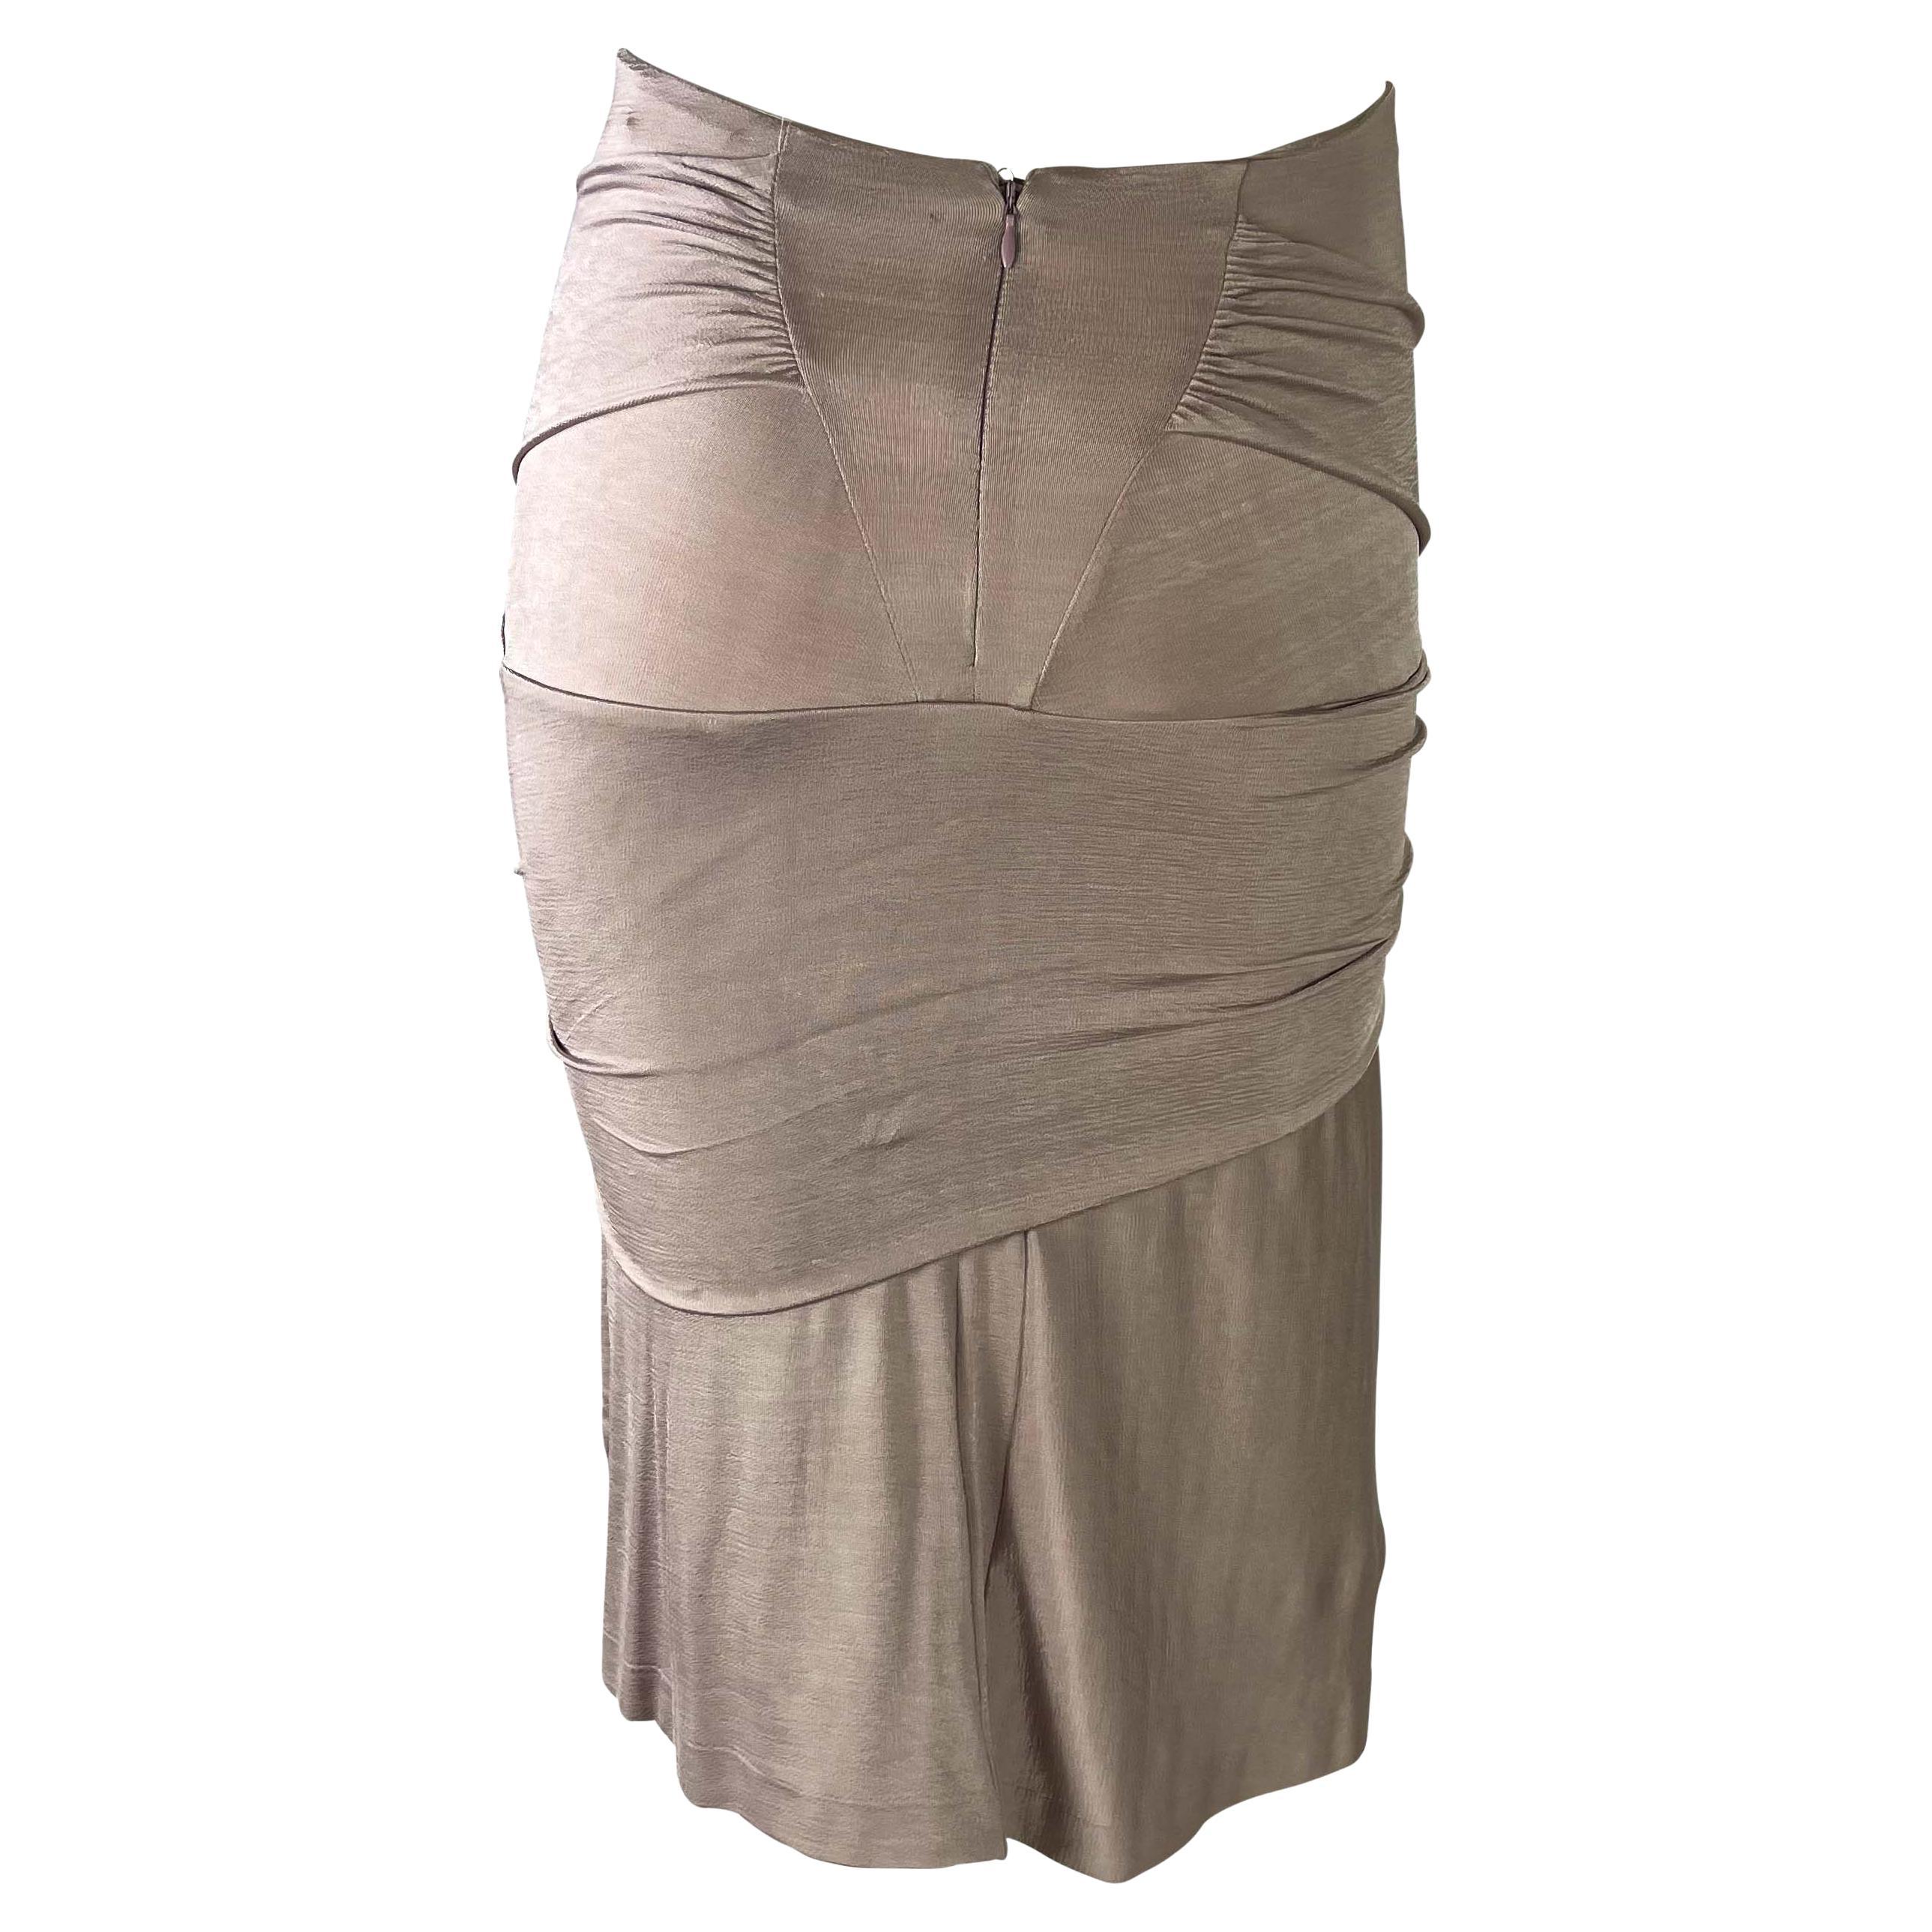 S/S 2003 Yves Saint Laurent by Tom Ford Runway Dusty Lavender Ruched Skirt For Sale 1